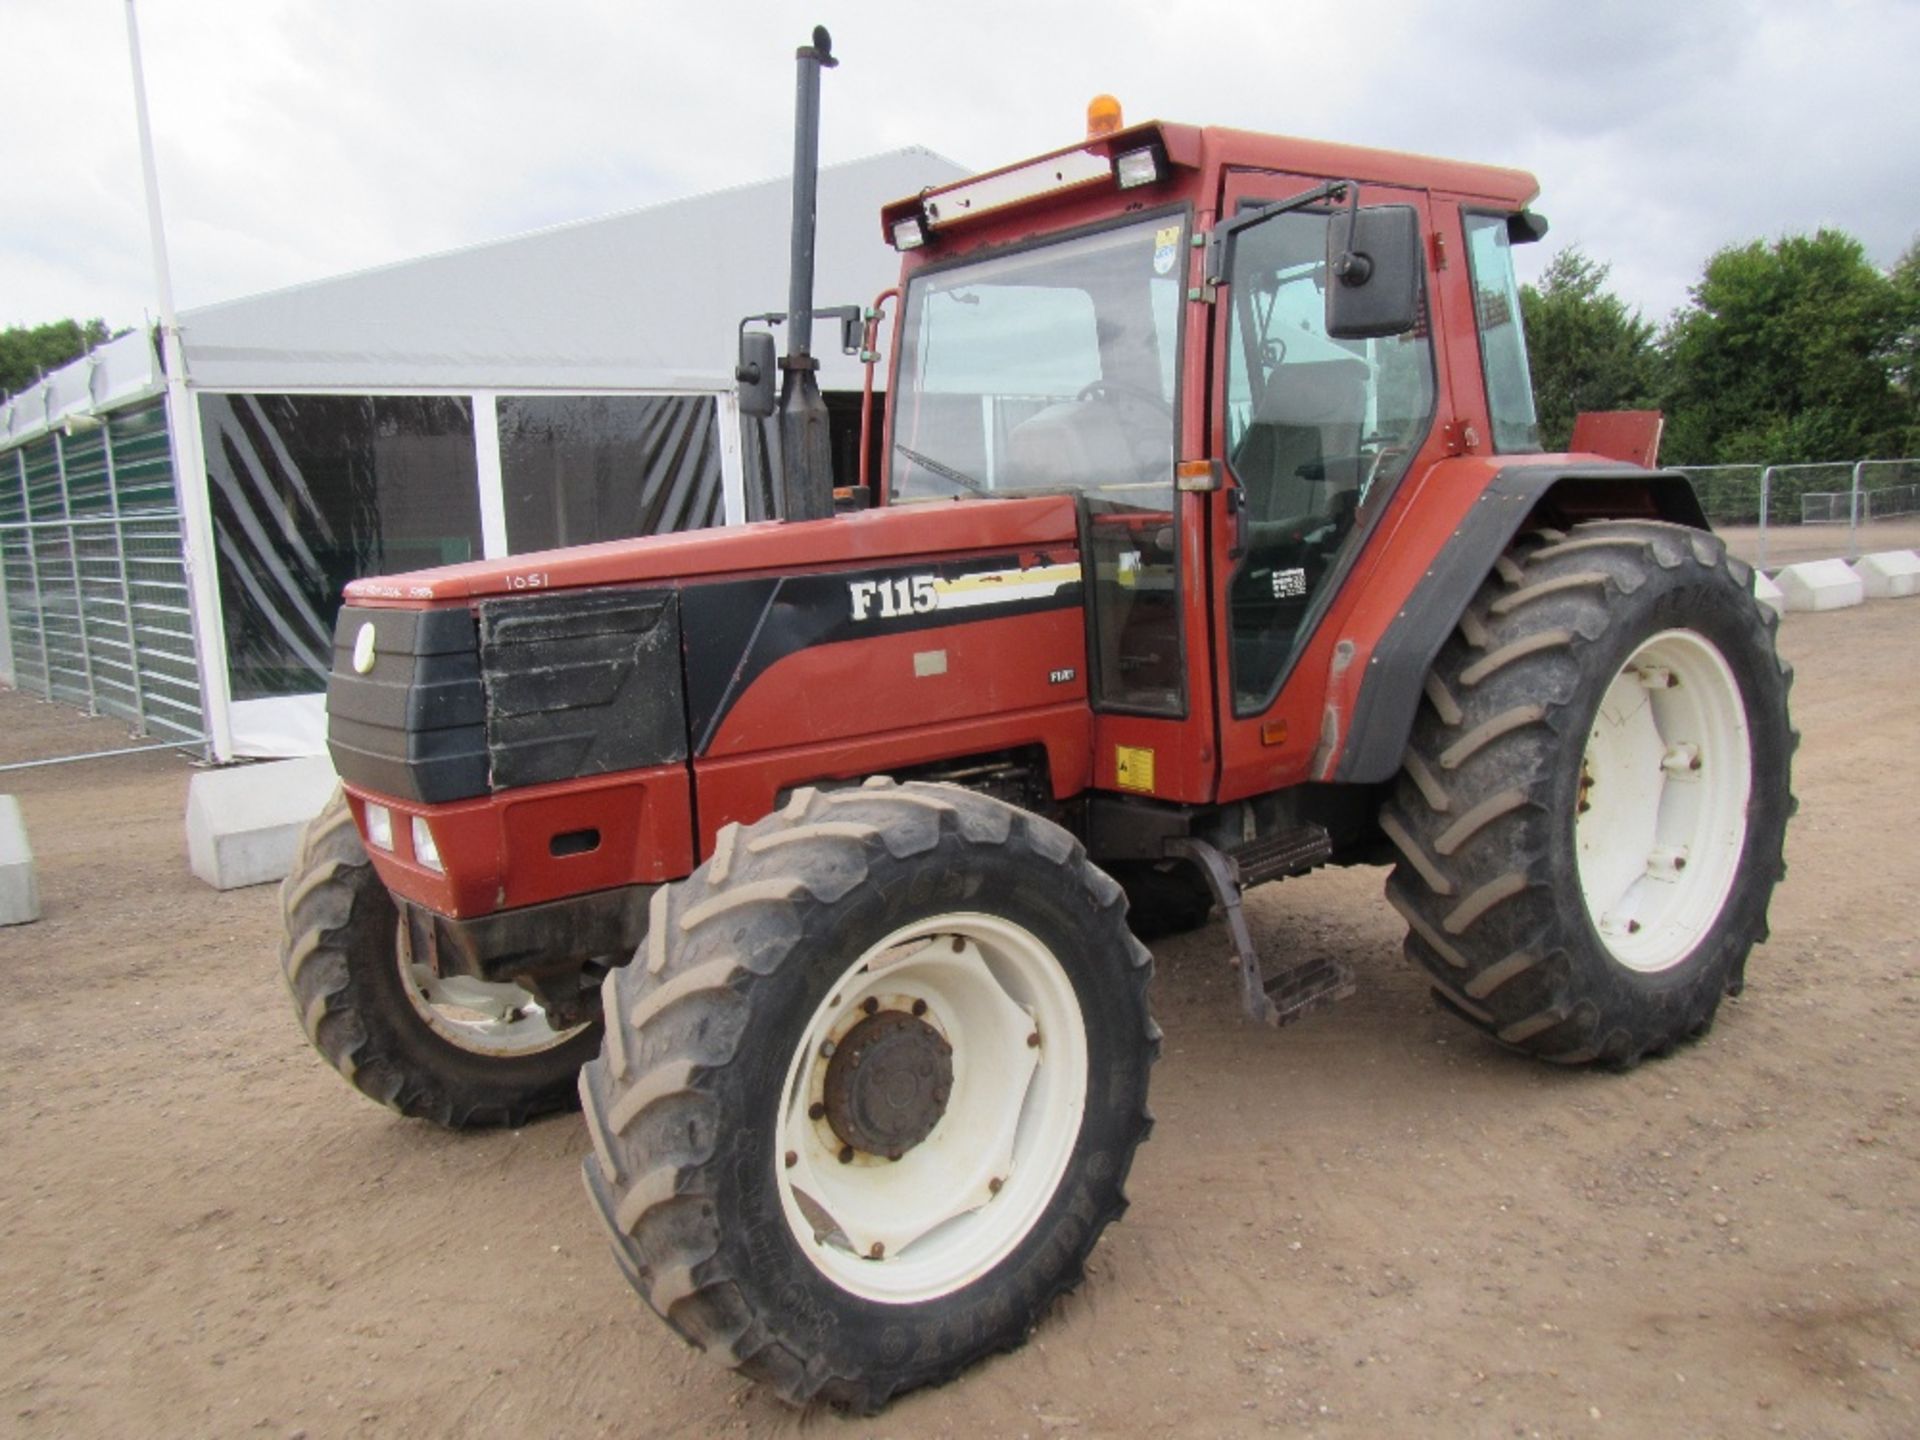 Fiat F115 Winner Tractor. Direct from farm. V5 will be supplied Reg. No. N448 FPU